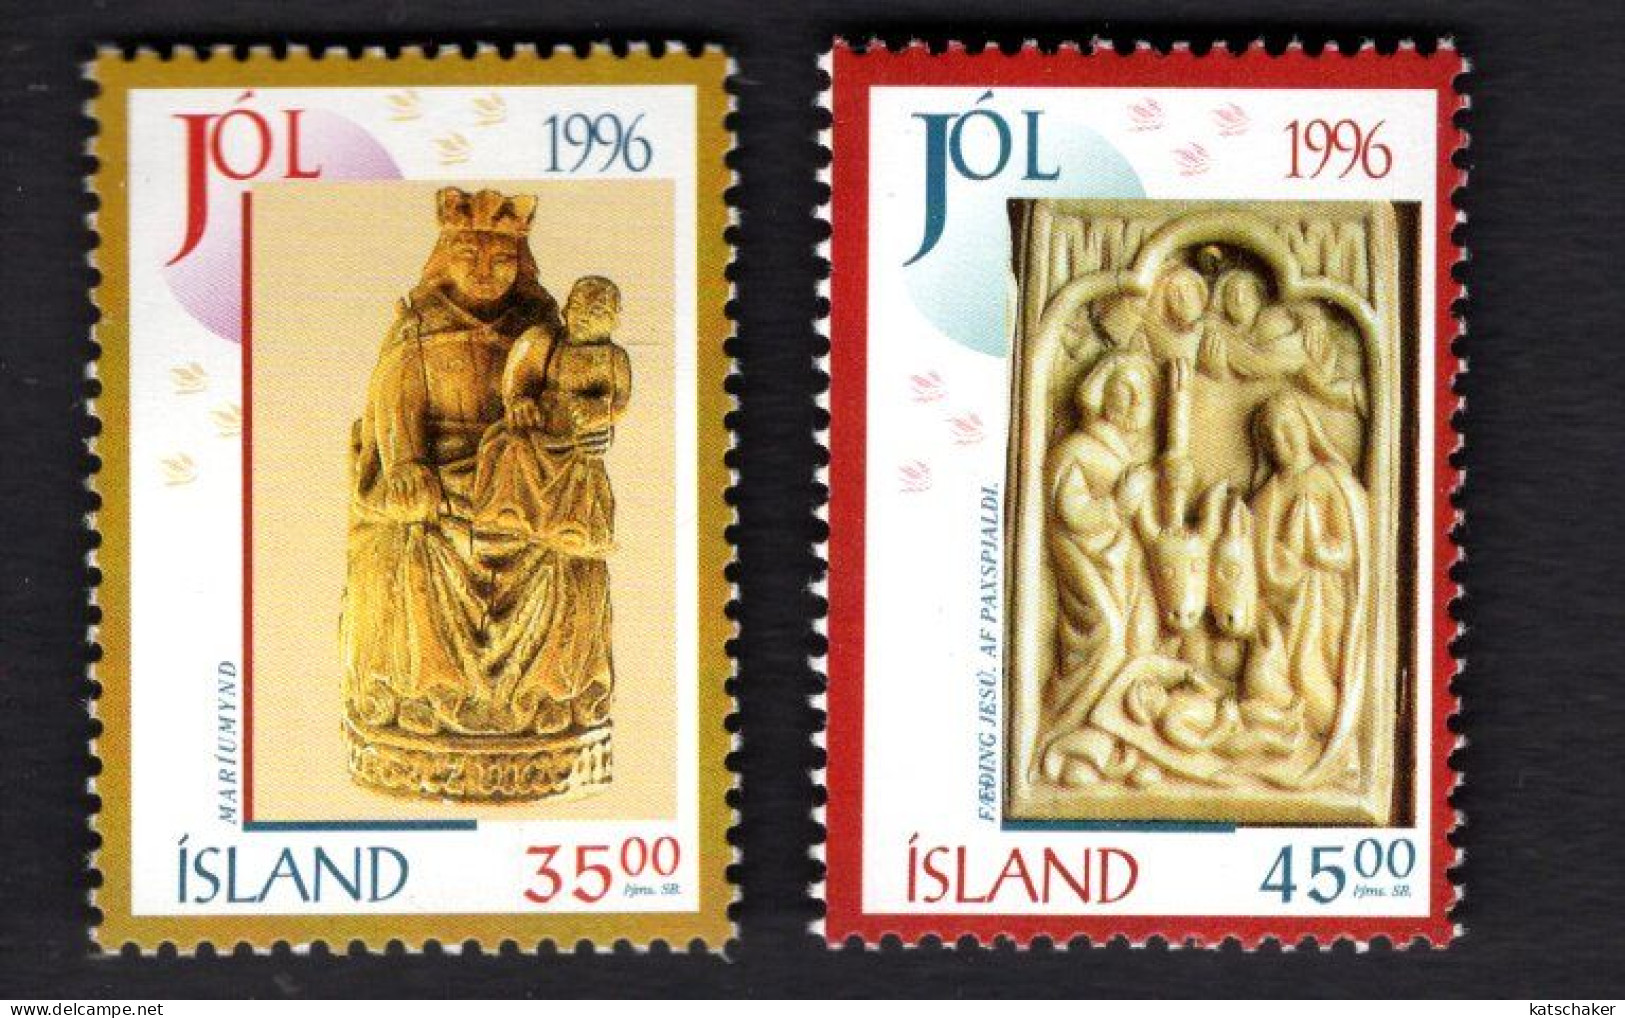 2022474959 1996 SCOTT 832 833 (XX)  POSTFRIS MINT NEVER HINGED - CHRISTMAS - ARTIFACTS FROM NATL MUSEUM OF ICELAND - Nuovi